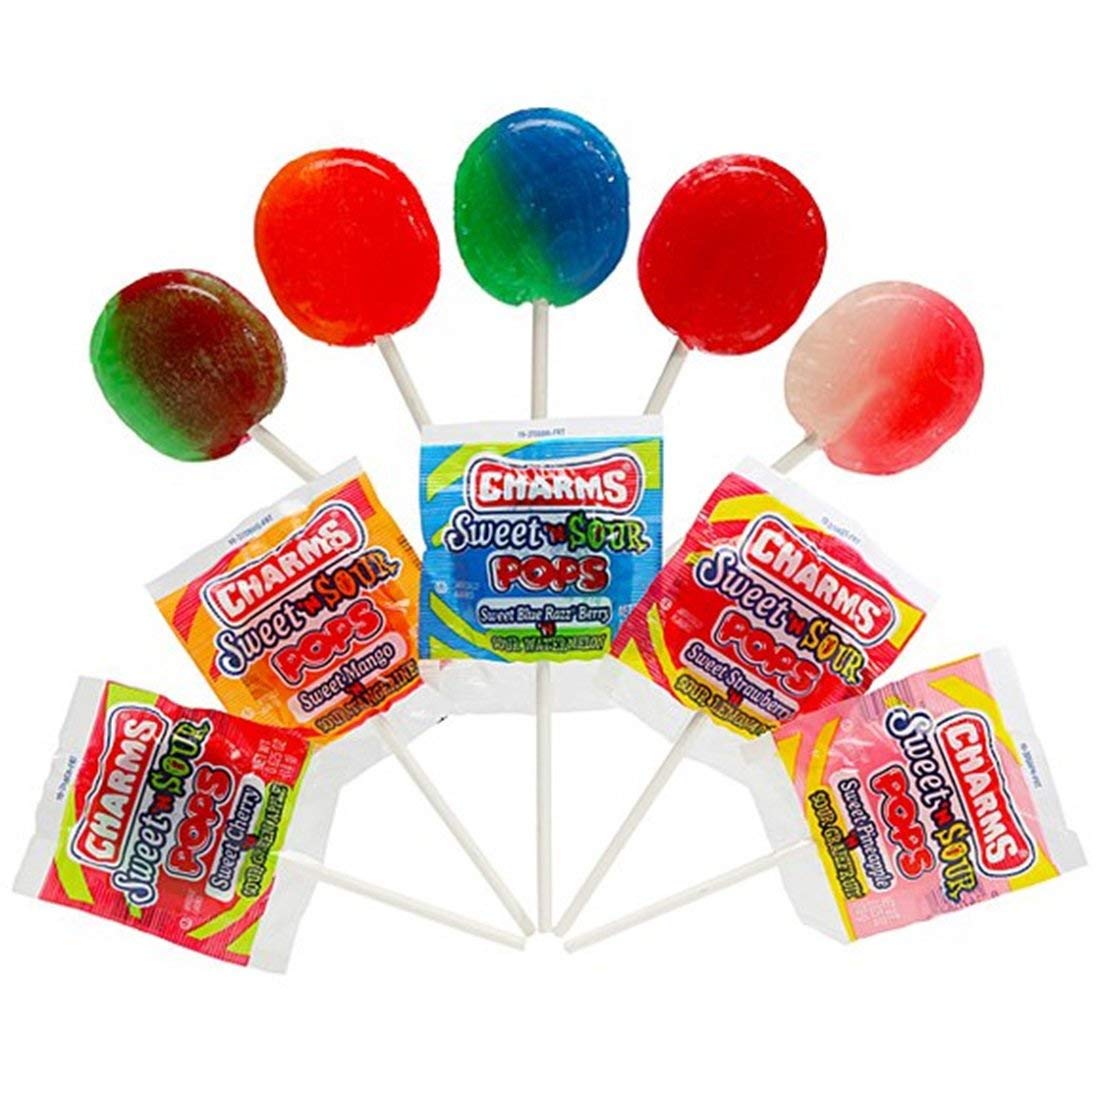  Set of 3 Charms Sweet N Sour Pops Lollipops, 3.85 oz Bags - Great to Stock Up for Halloween, Parties, or just to Surprise the Little Ones! (3)